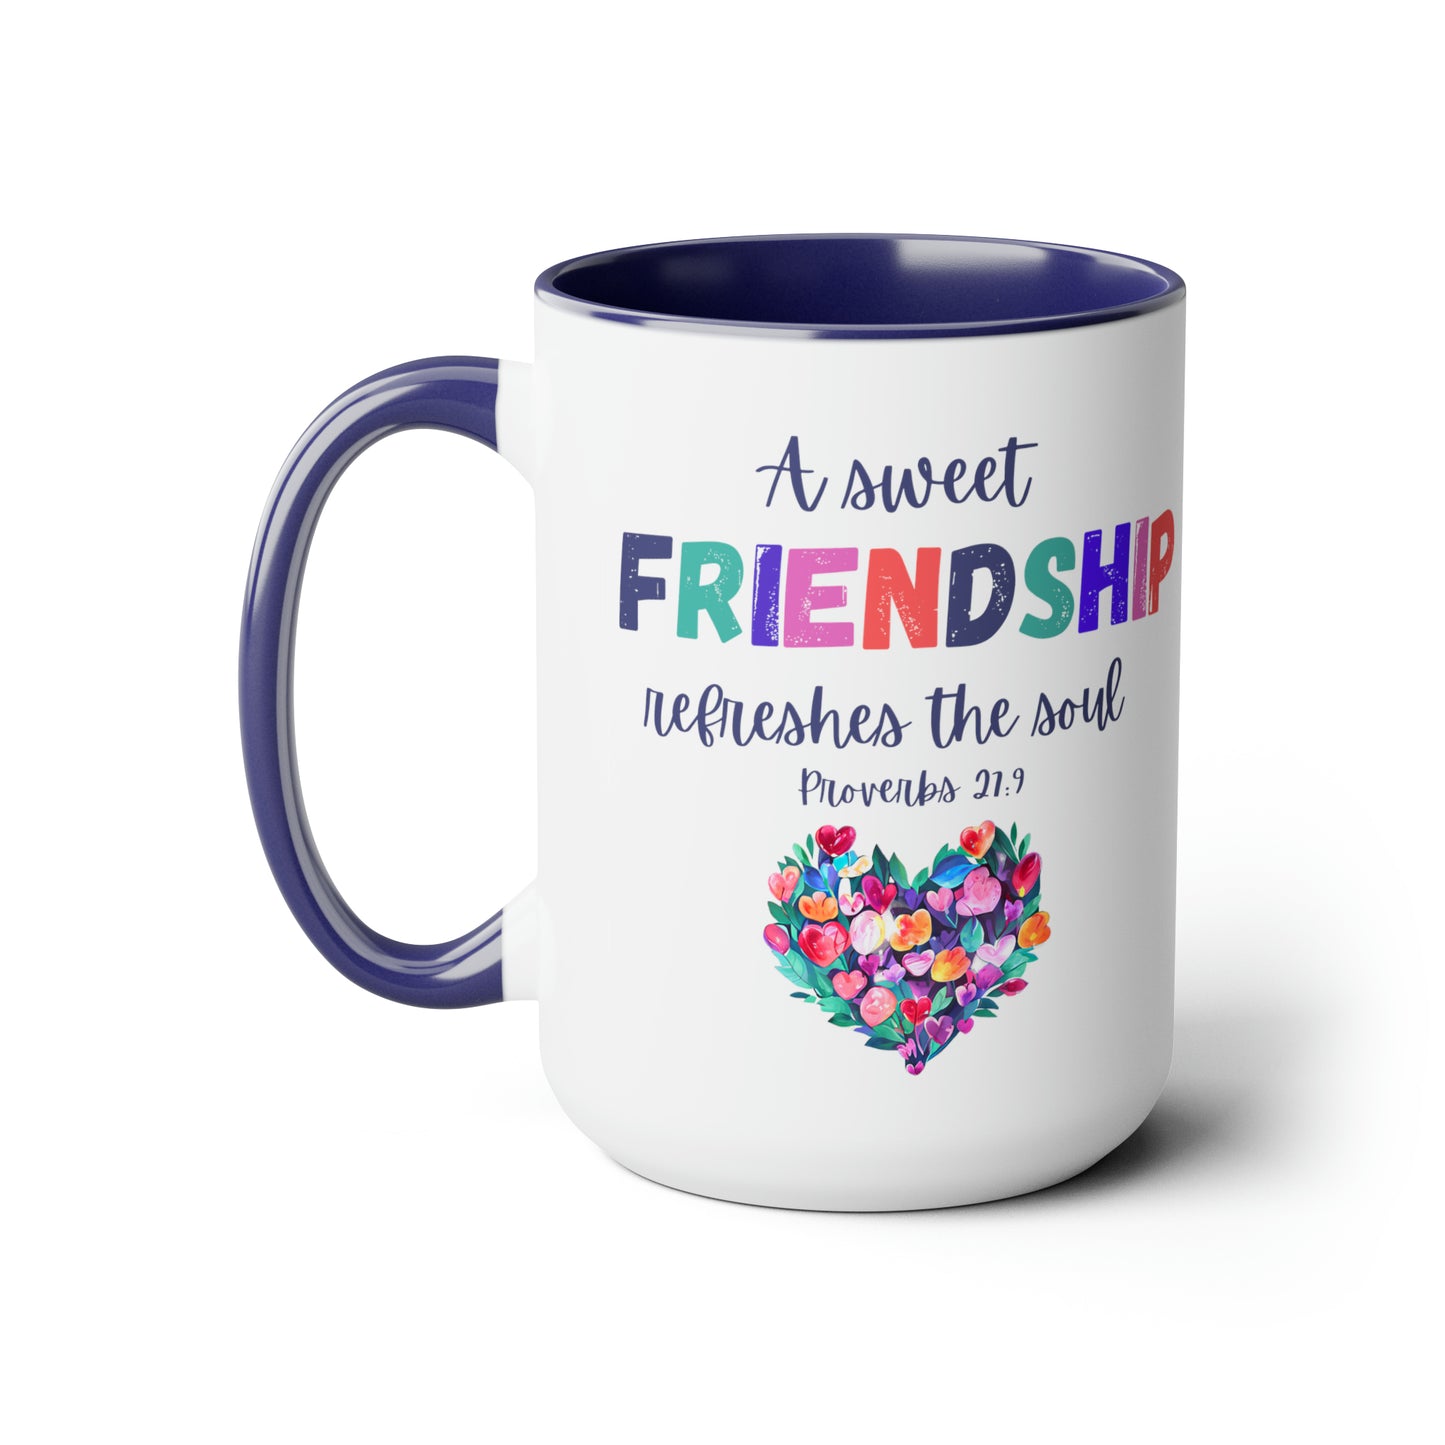 A Sweet Friendship Refreshes the Soul Two-Tone Coffee Mugs, Large 15oz, Coffee Mug, Coffee Cup, Gifts For Friend, Friendship Gift, Drink Mug